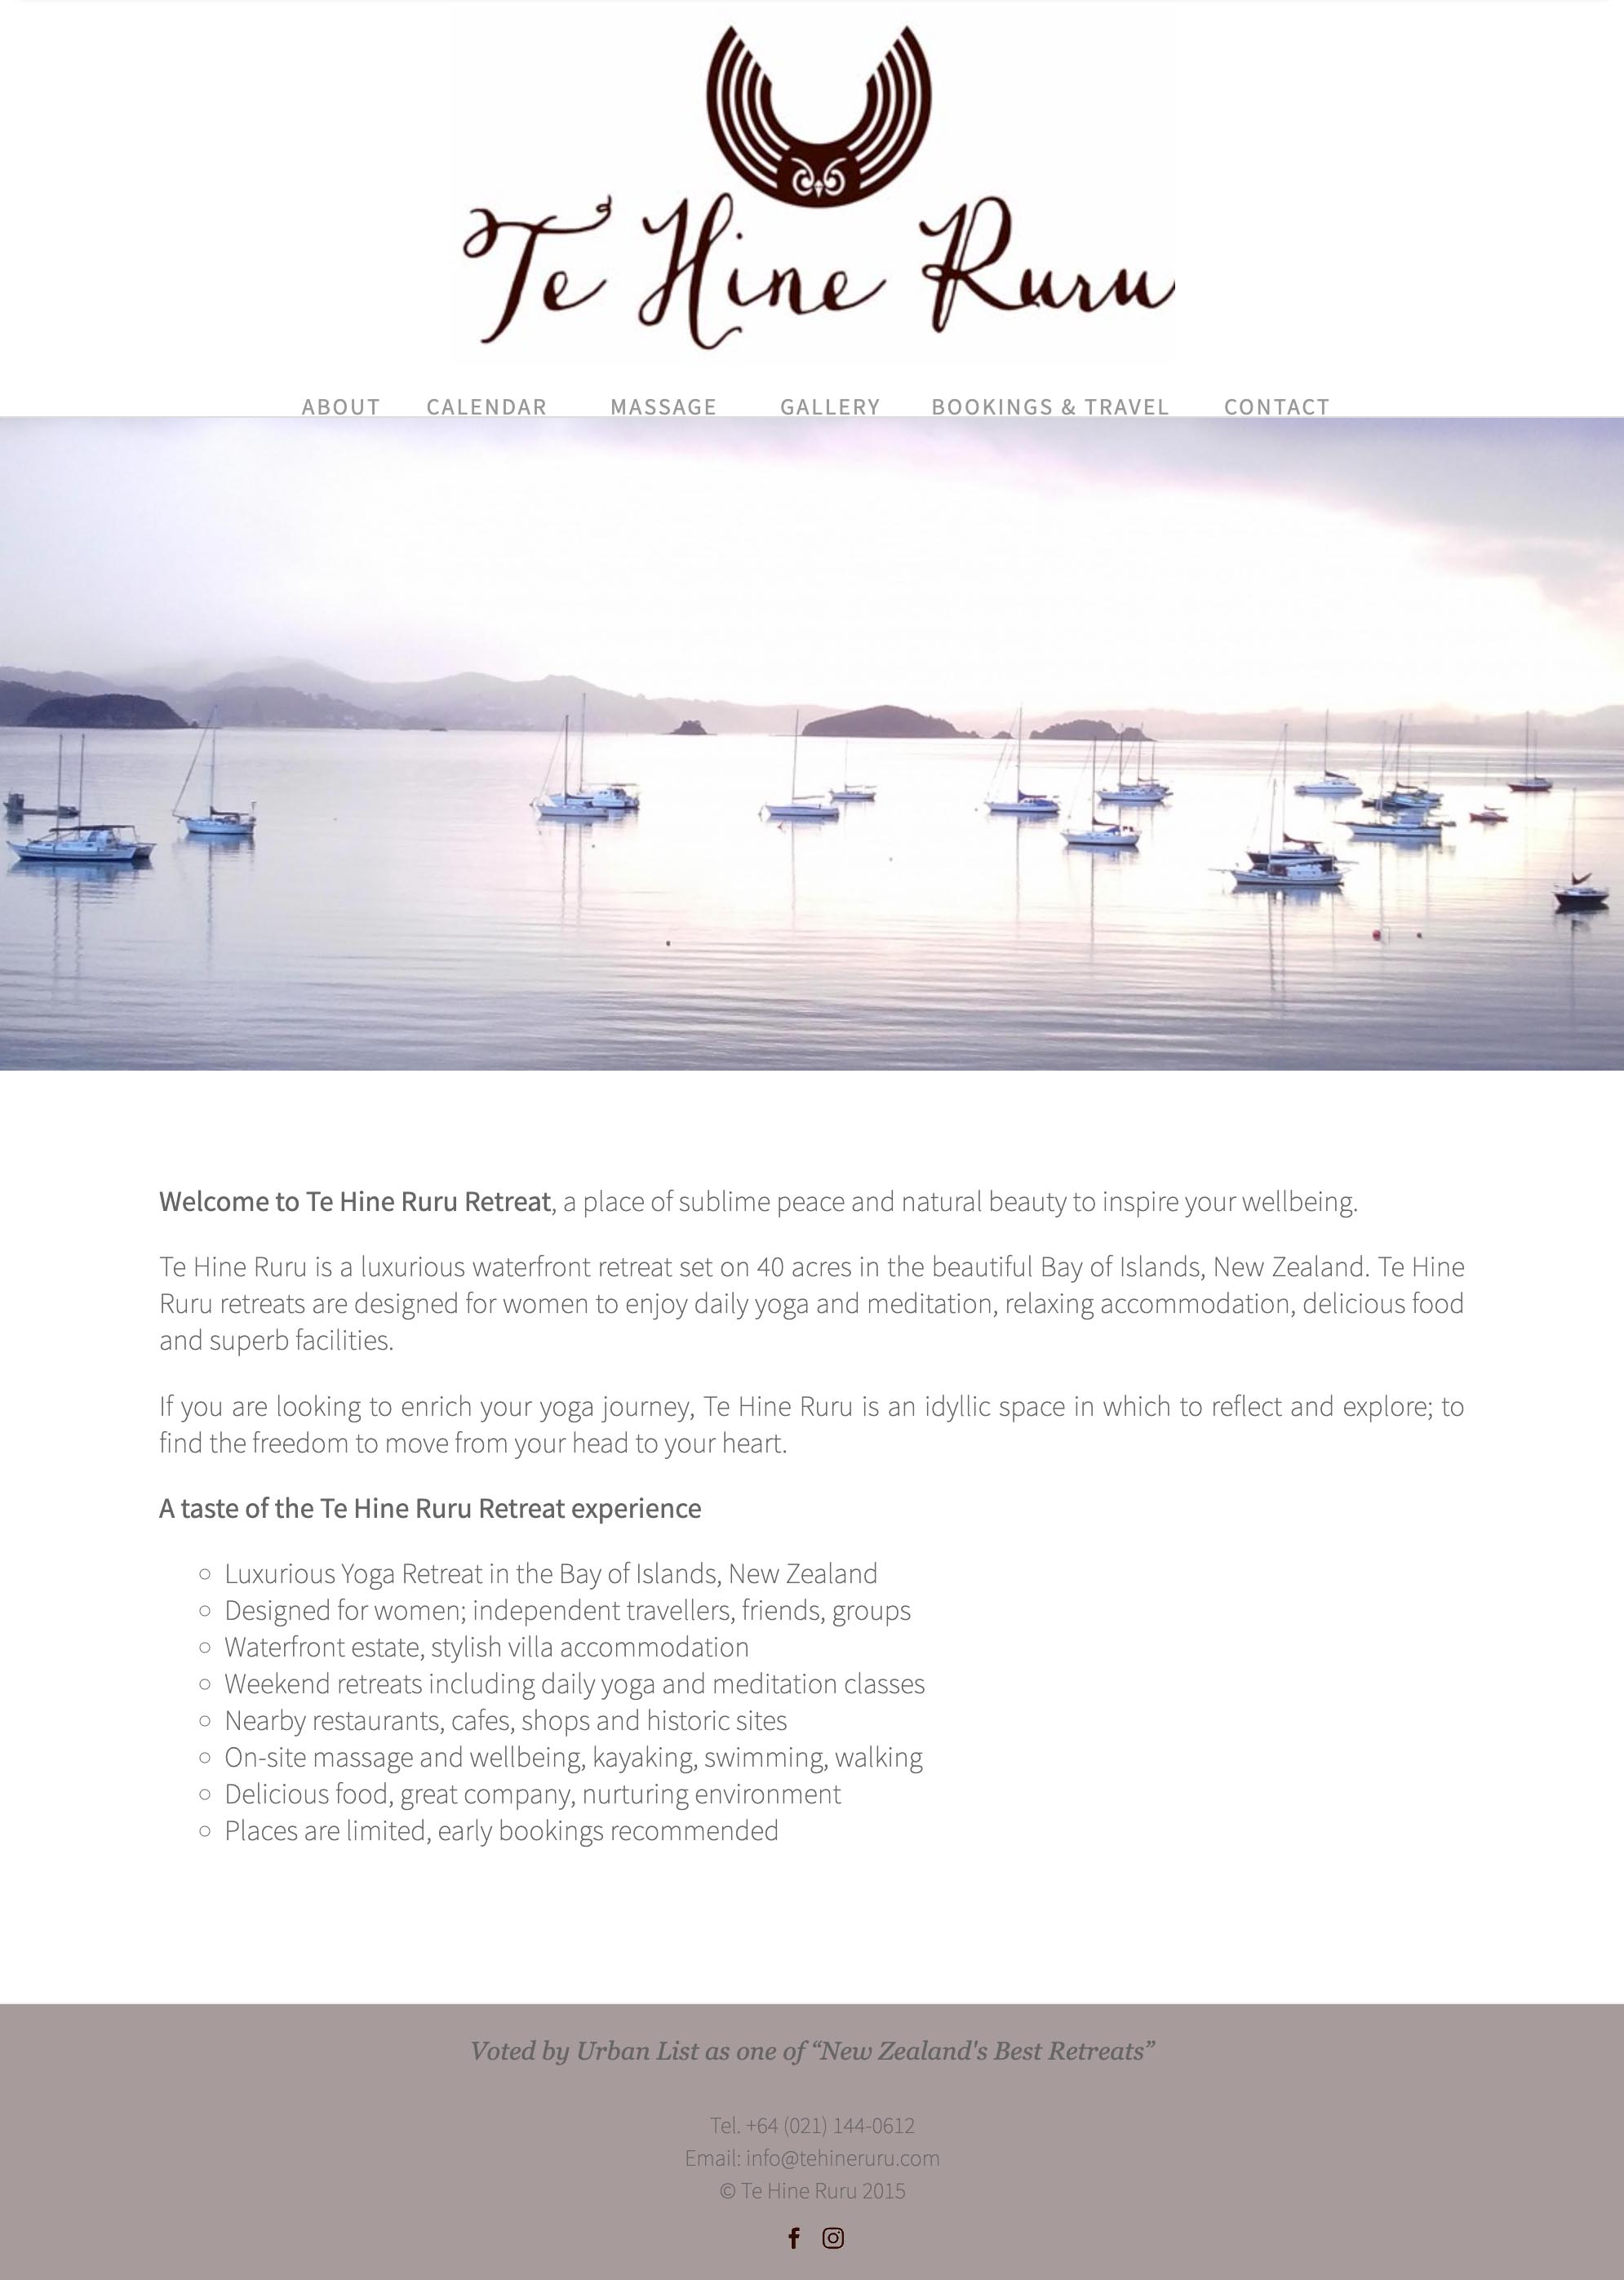 website design for travel-food-health - Web design for a yoga retreat and massage center in New Zealand. The site features a very simple responsive layout with many images.																																													 - long-scrolling page with rich visual sections to help a user find what they are looking for.